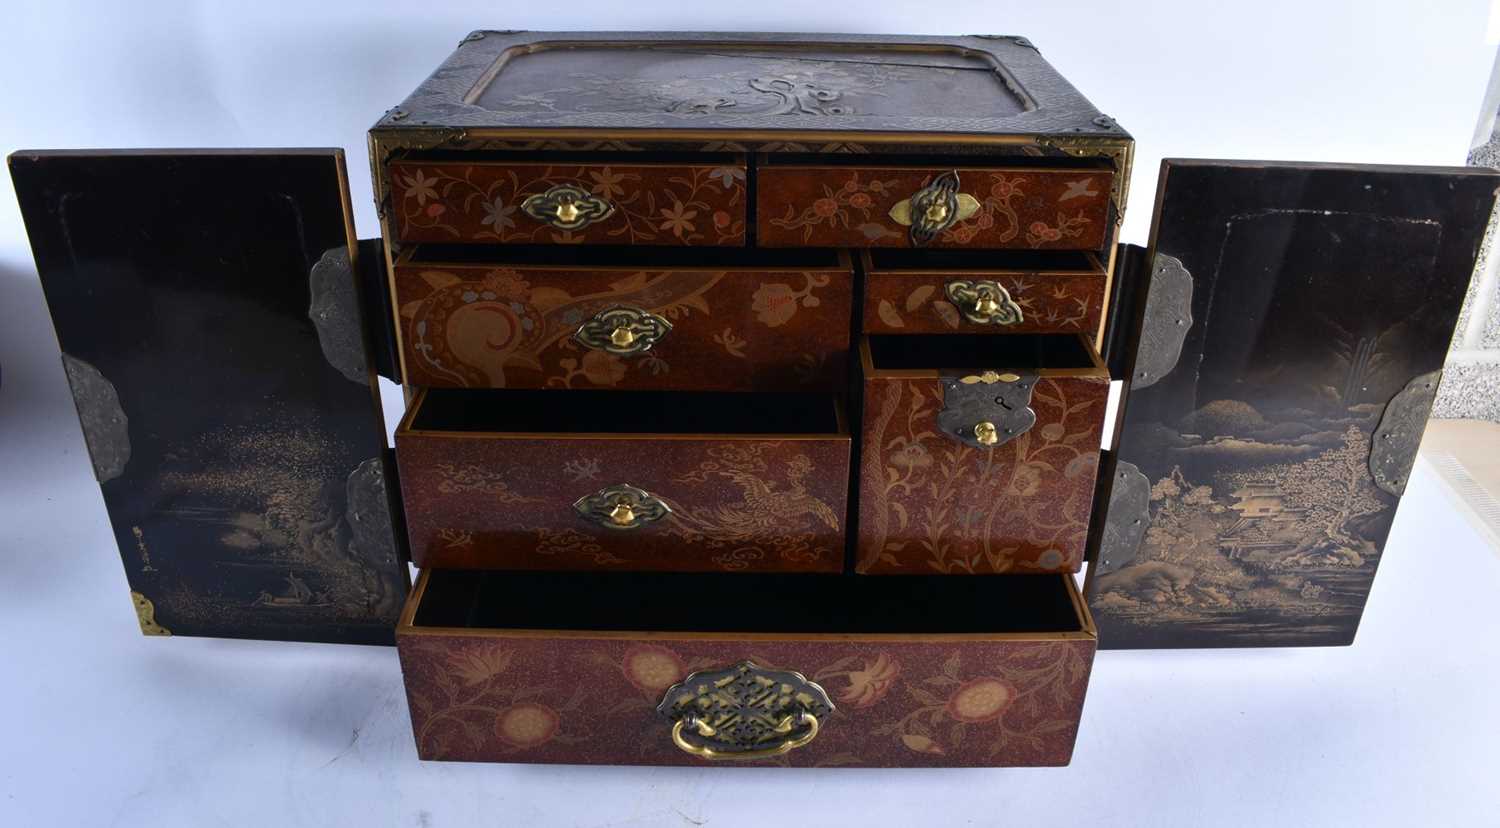 A VERY FINE 18TH/19TH CENTURY JAPANESE EDO PERIOD LACQUERED TABLE CABINET by Tsurushita Chouji, upon - Image 18 of 32